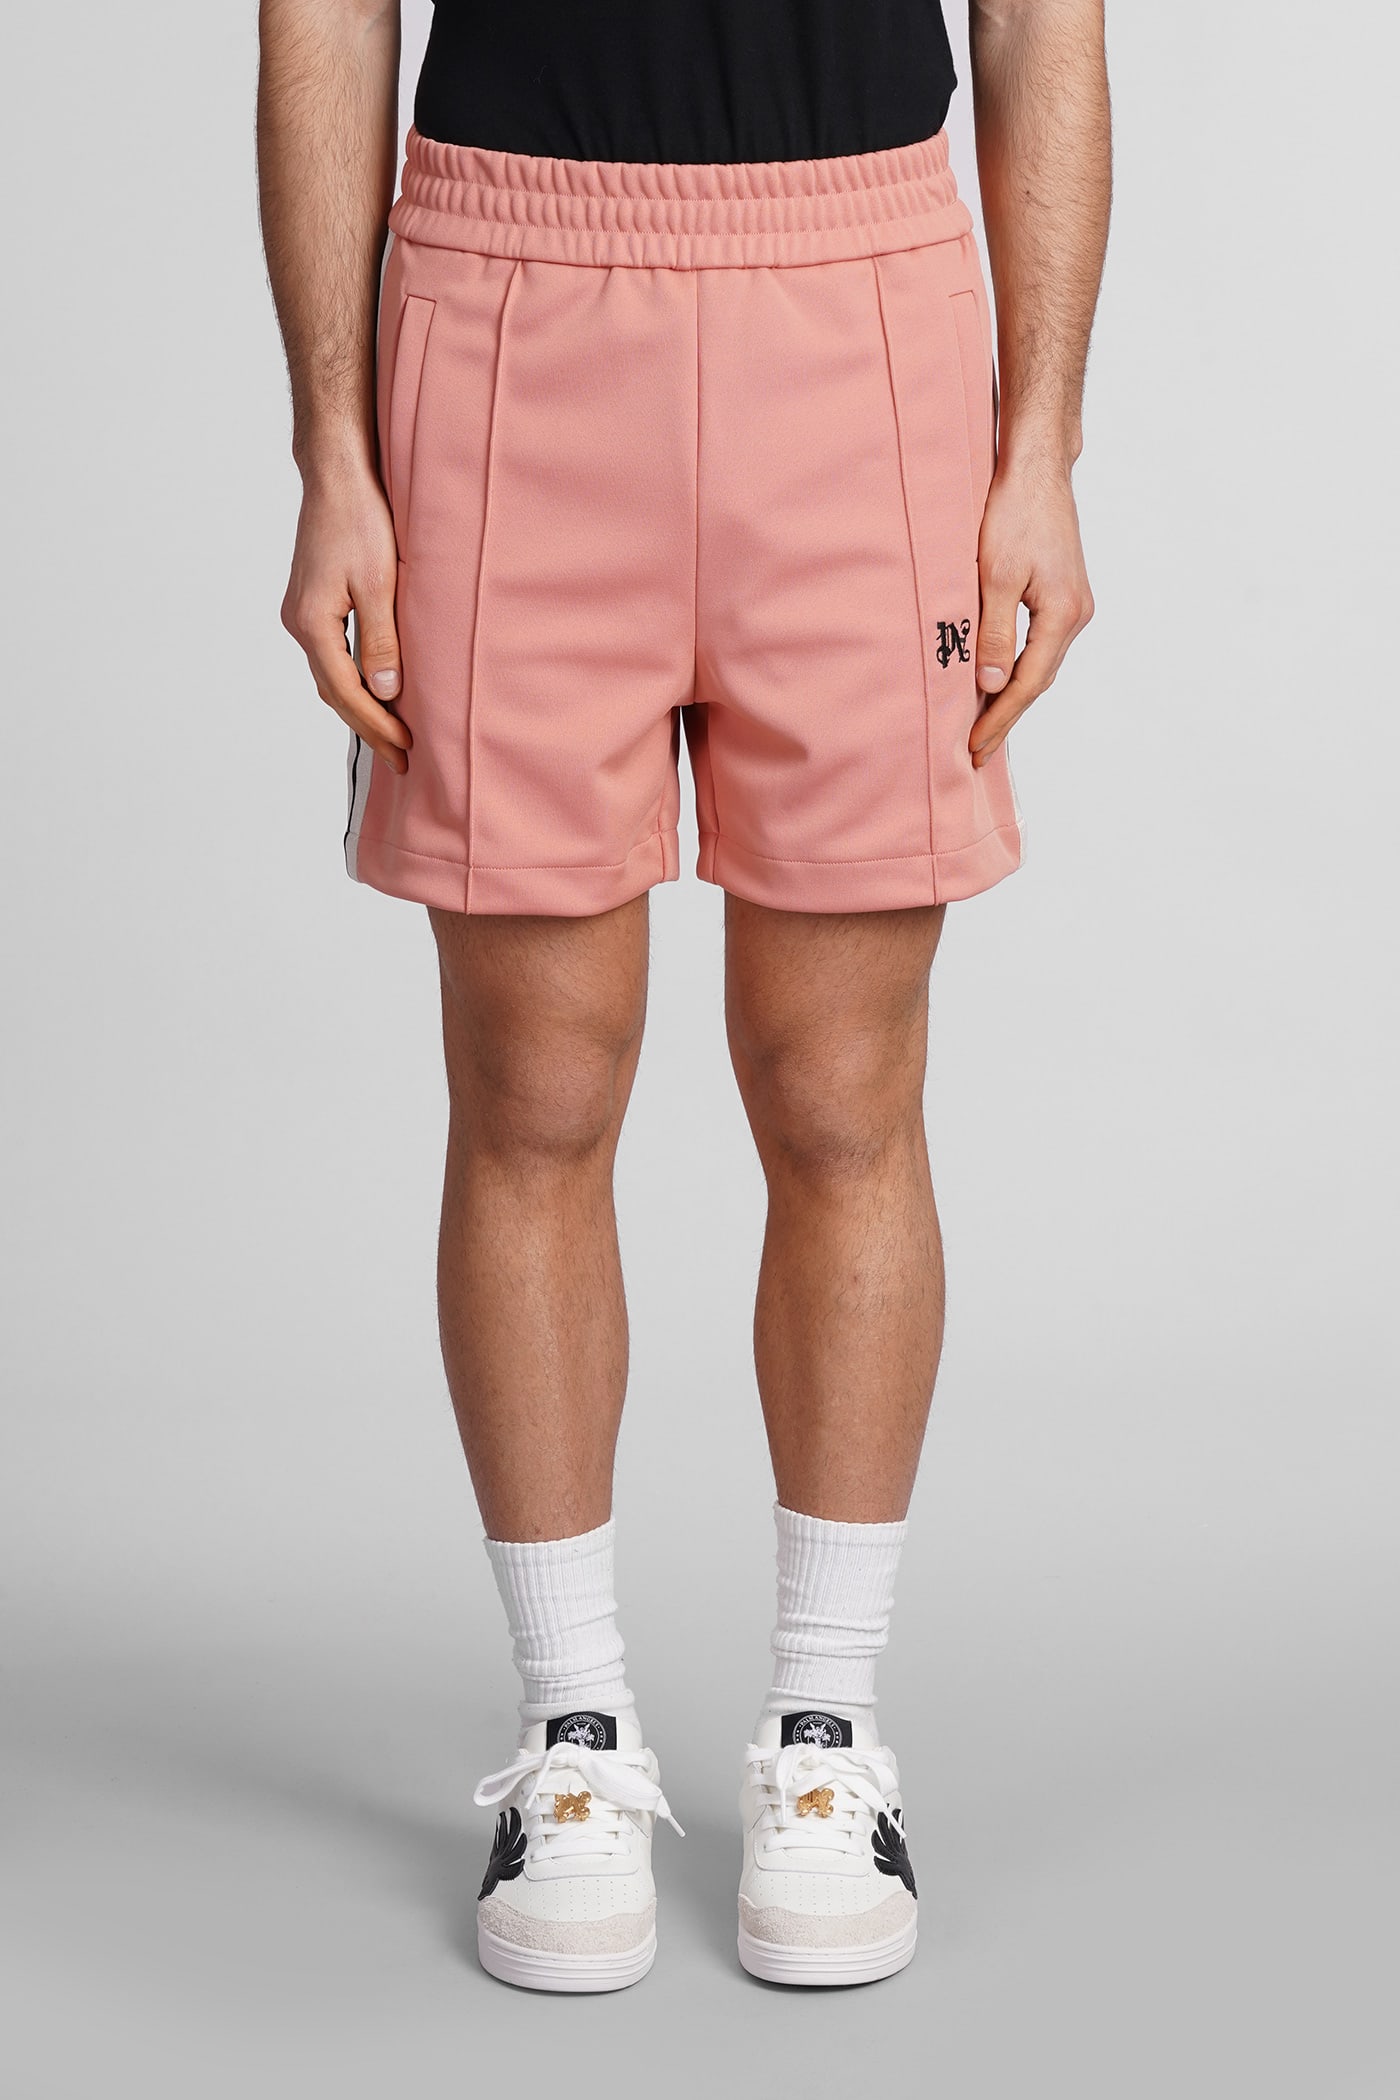 PALM ANGELS SHORTS IN ROSE-PINK POLYESTER